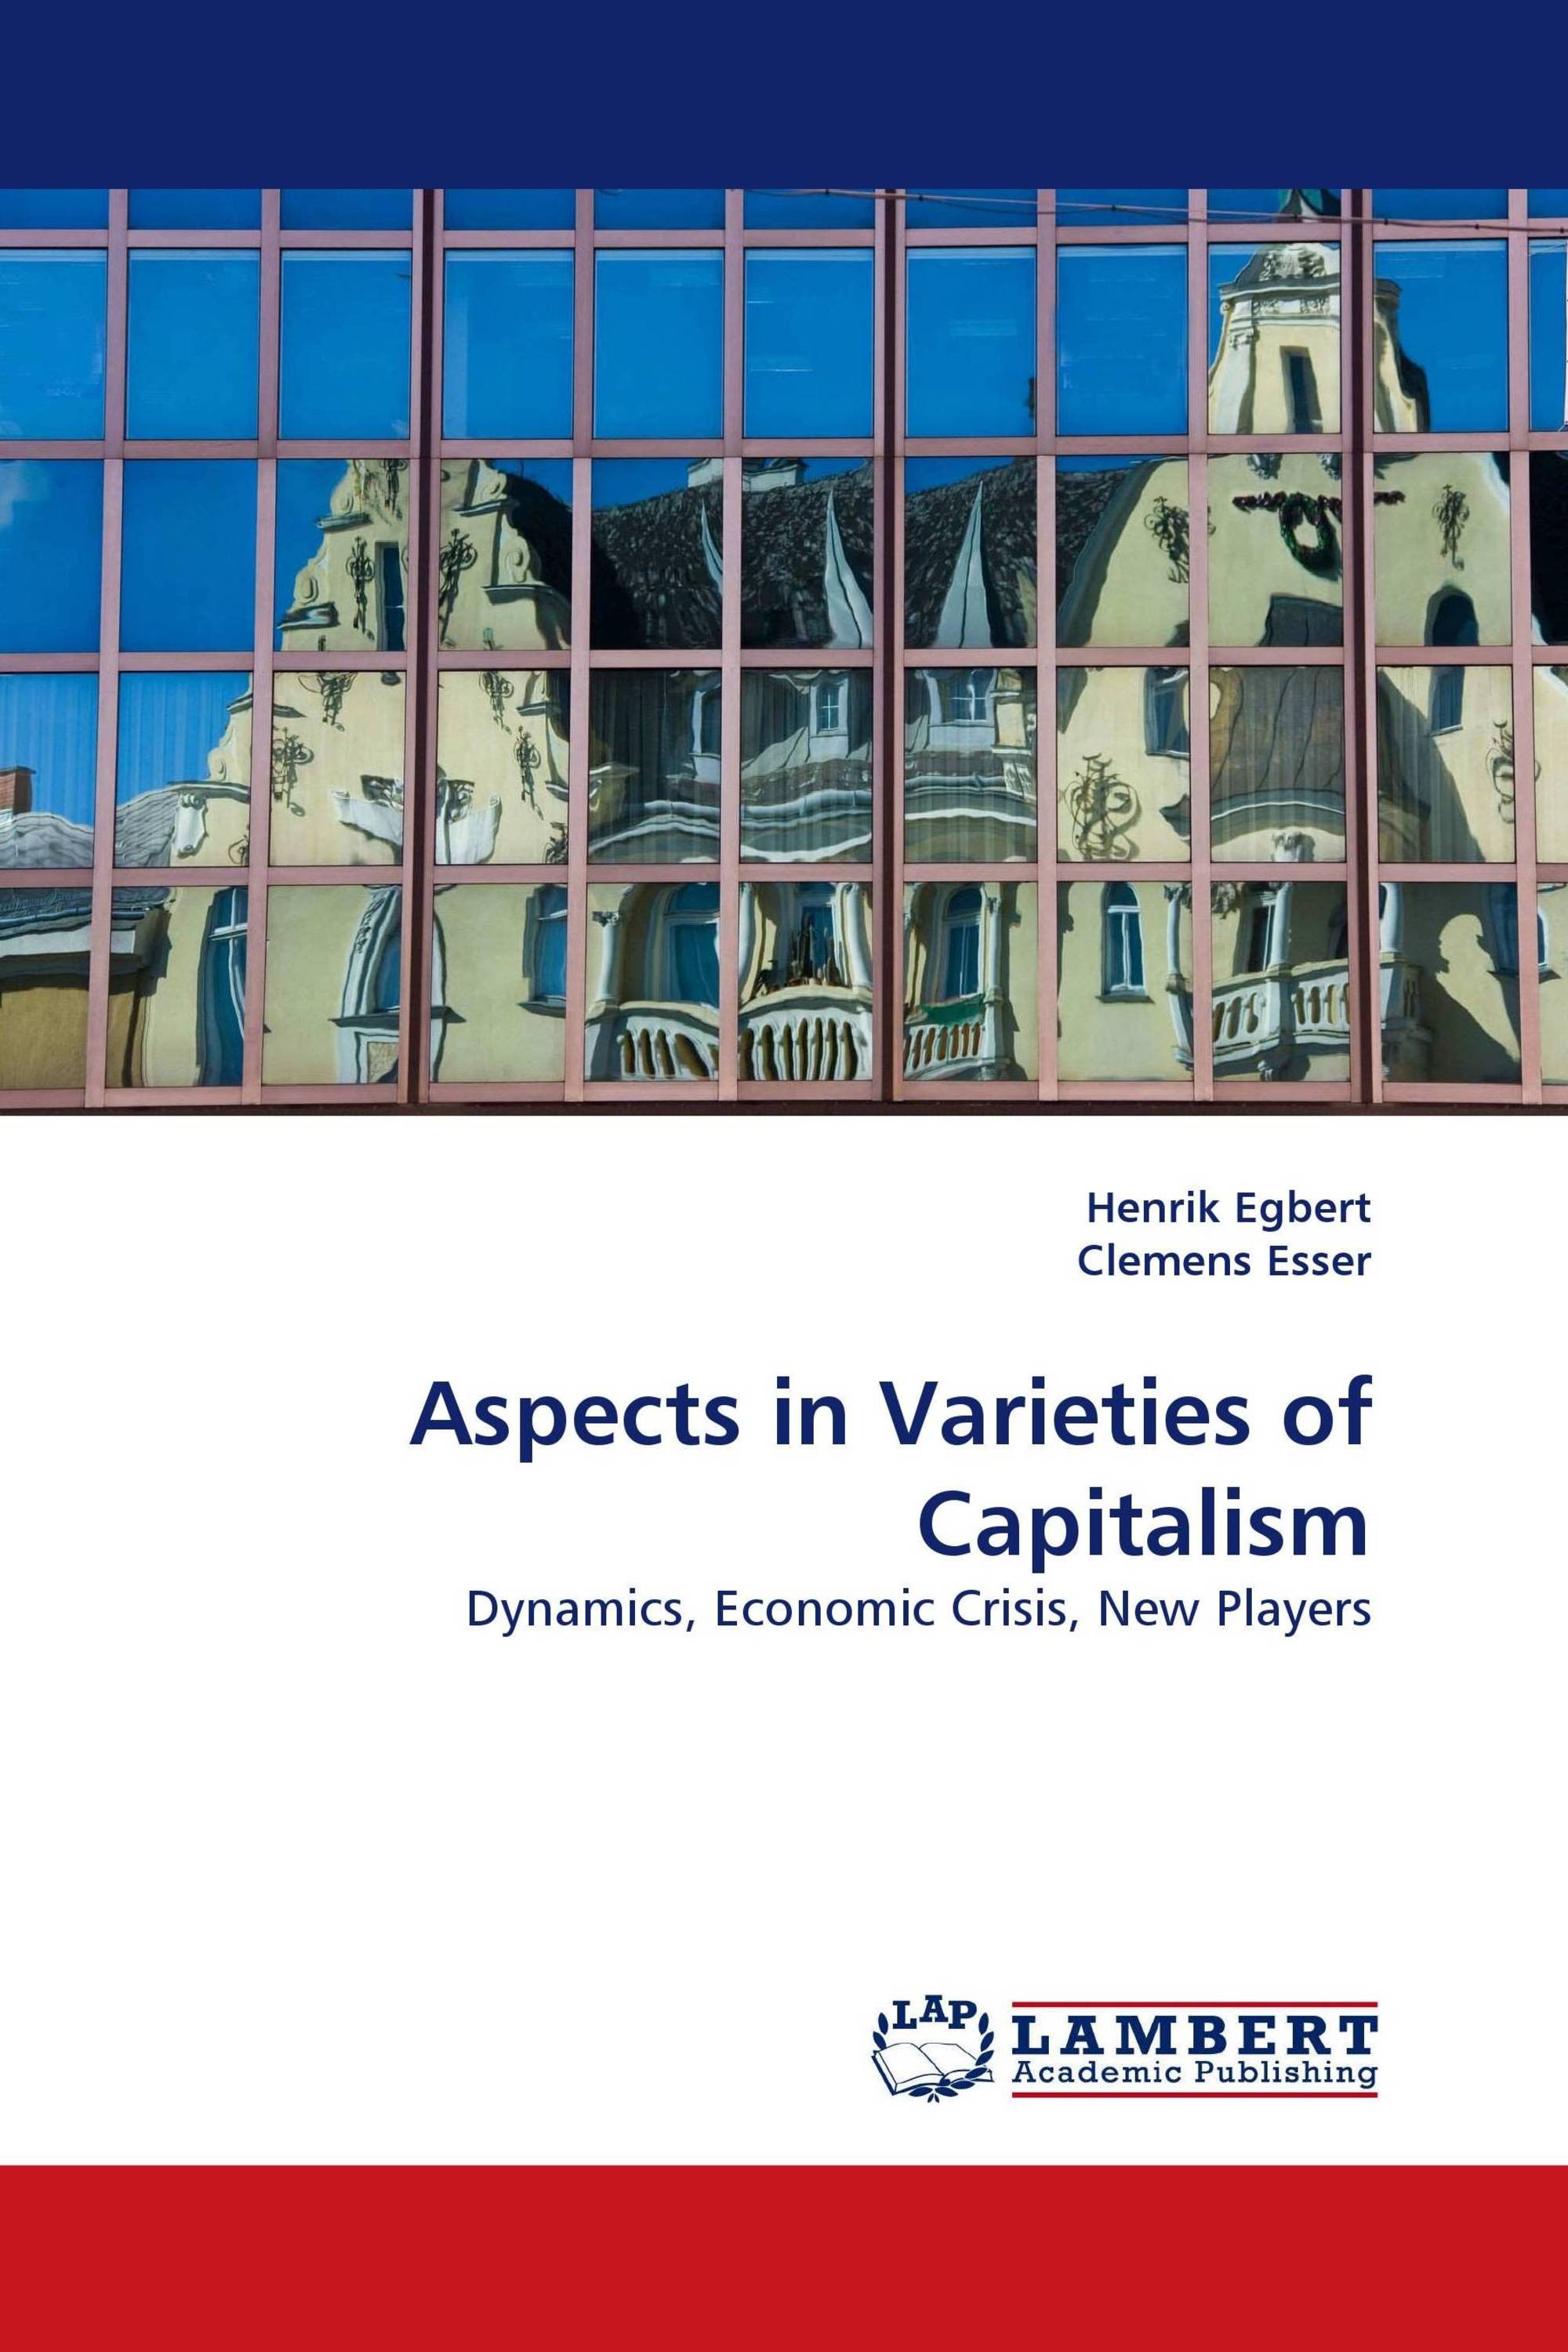 Aspects in Varieties of Capitalism